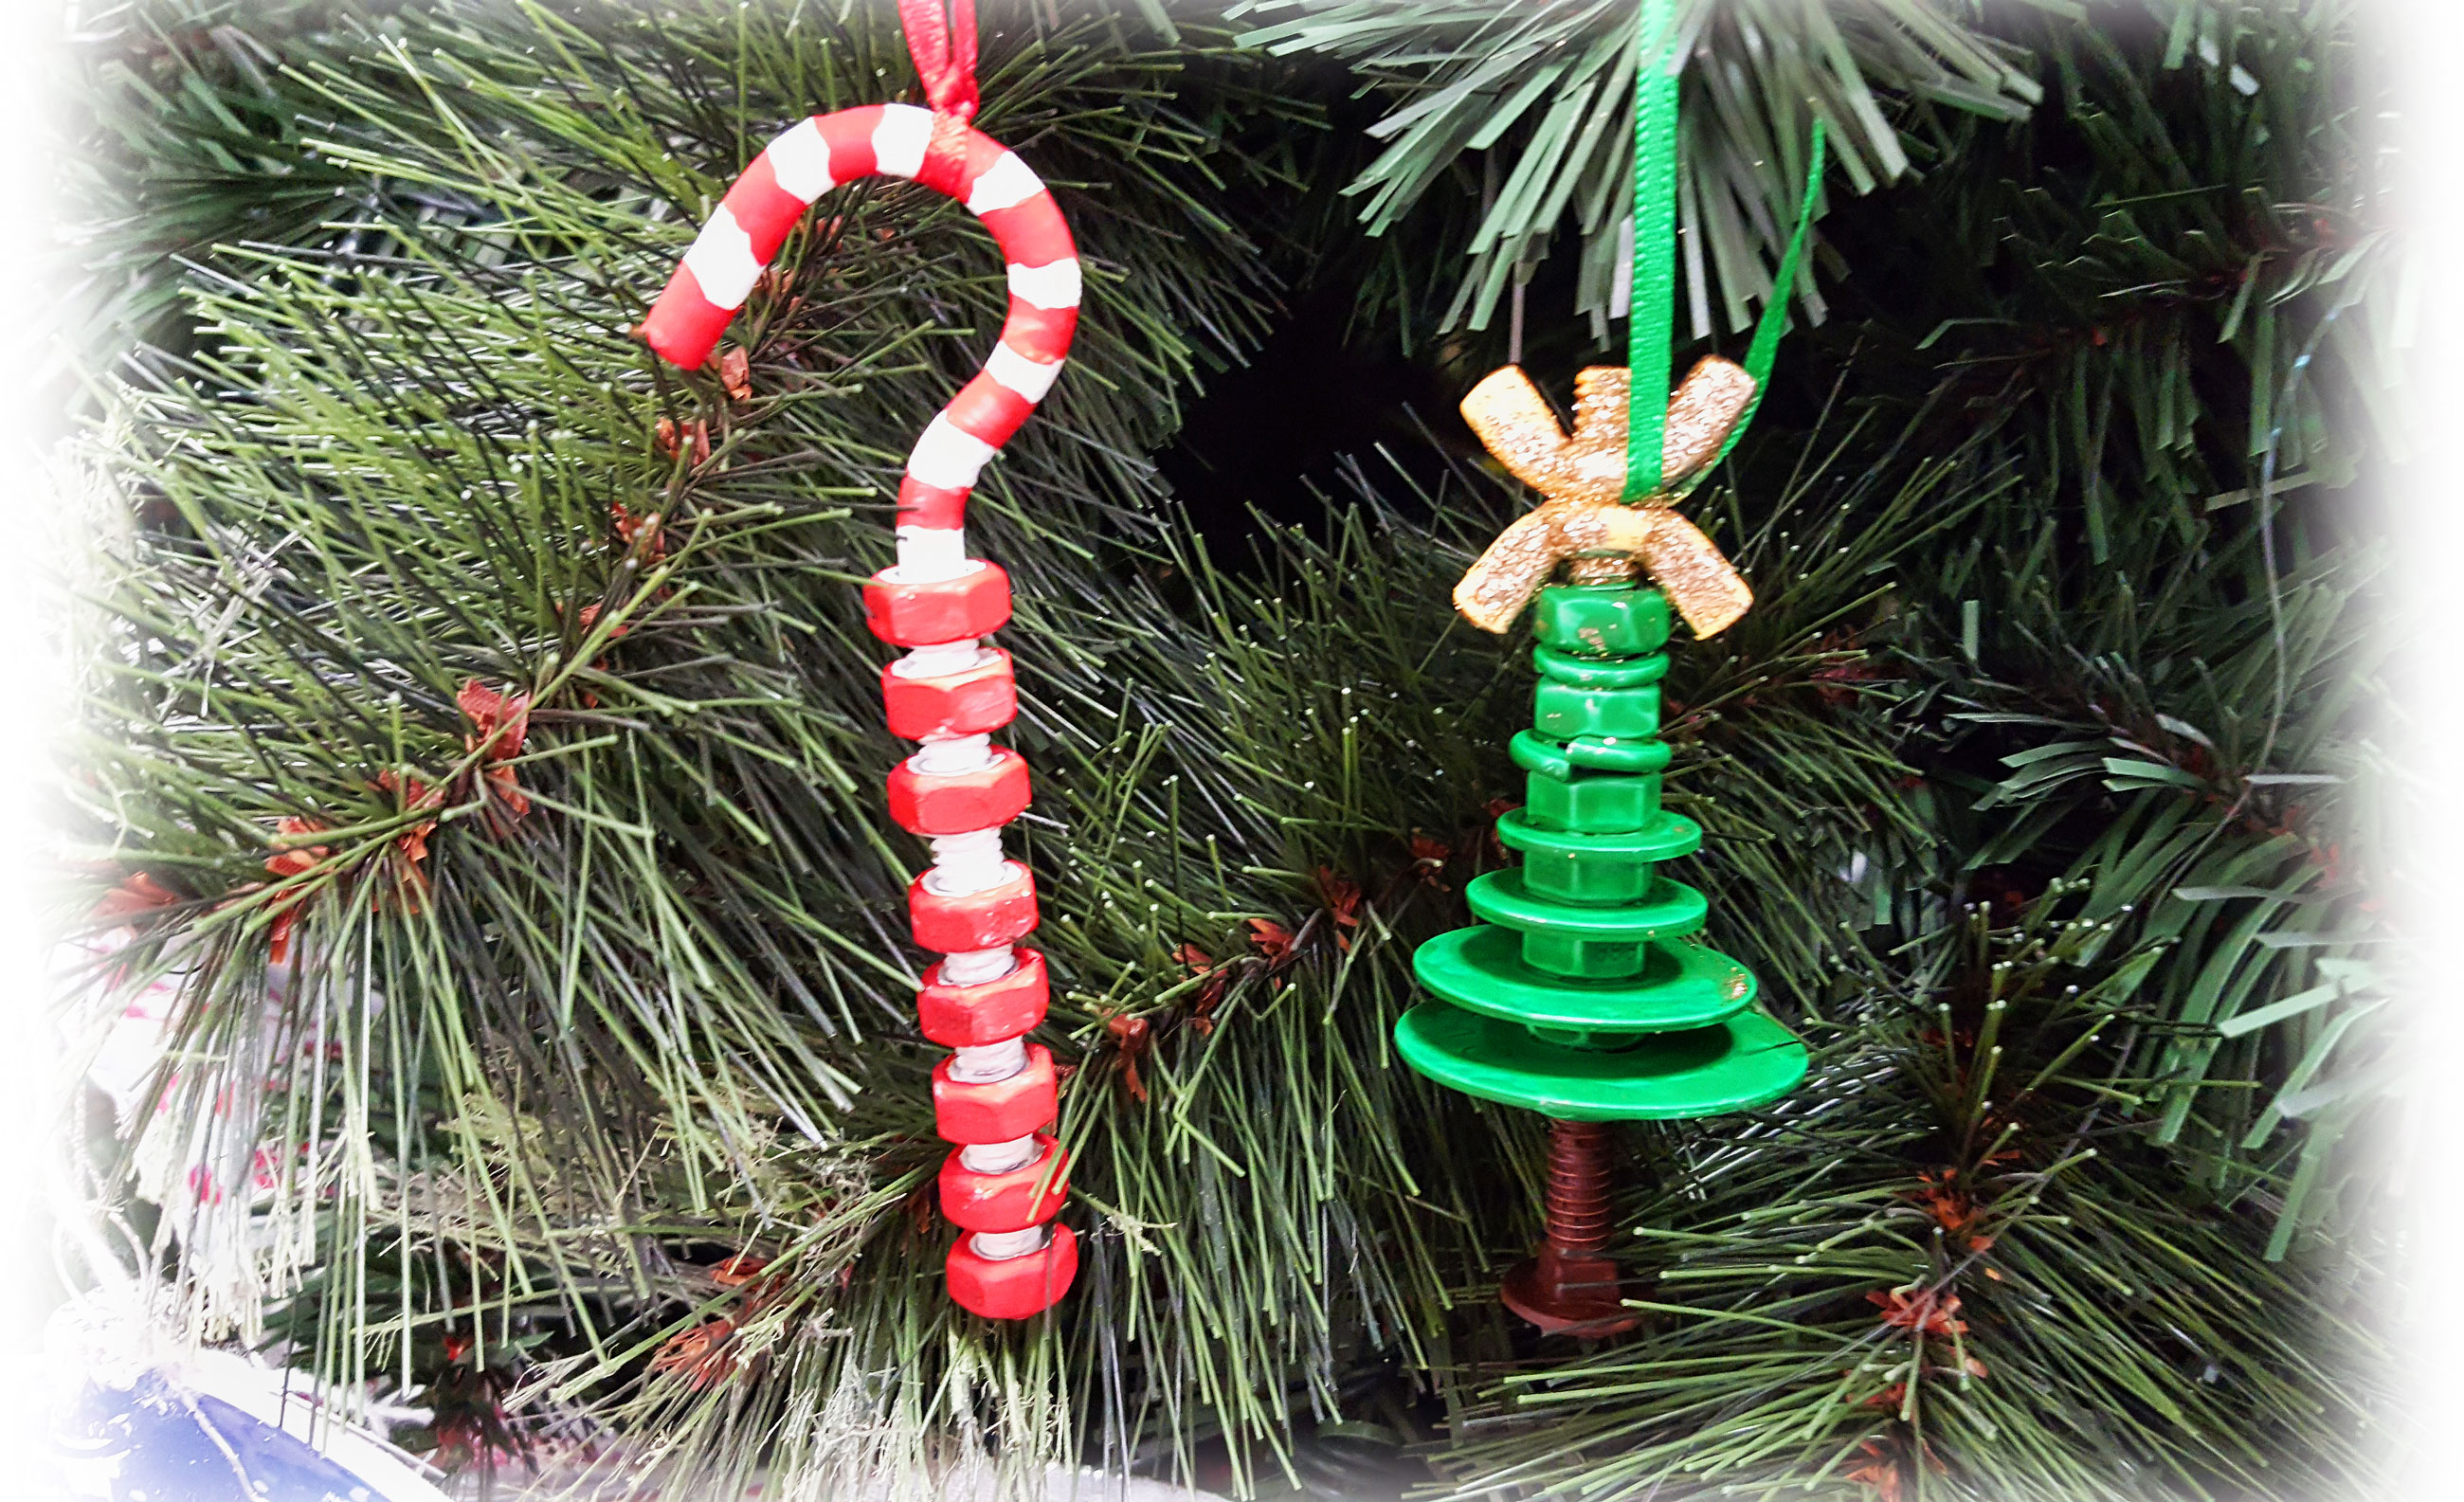 DIY candy cane and tree Christmas ornaments made with screws, nuts and bolts - perfect for Father's Day! | OrnamentShop.com